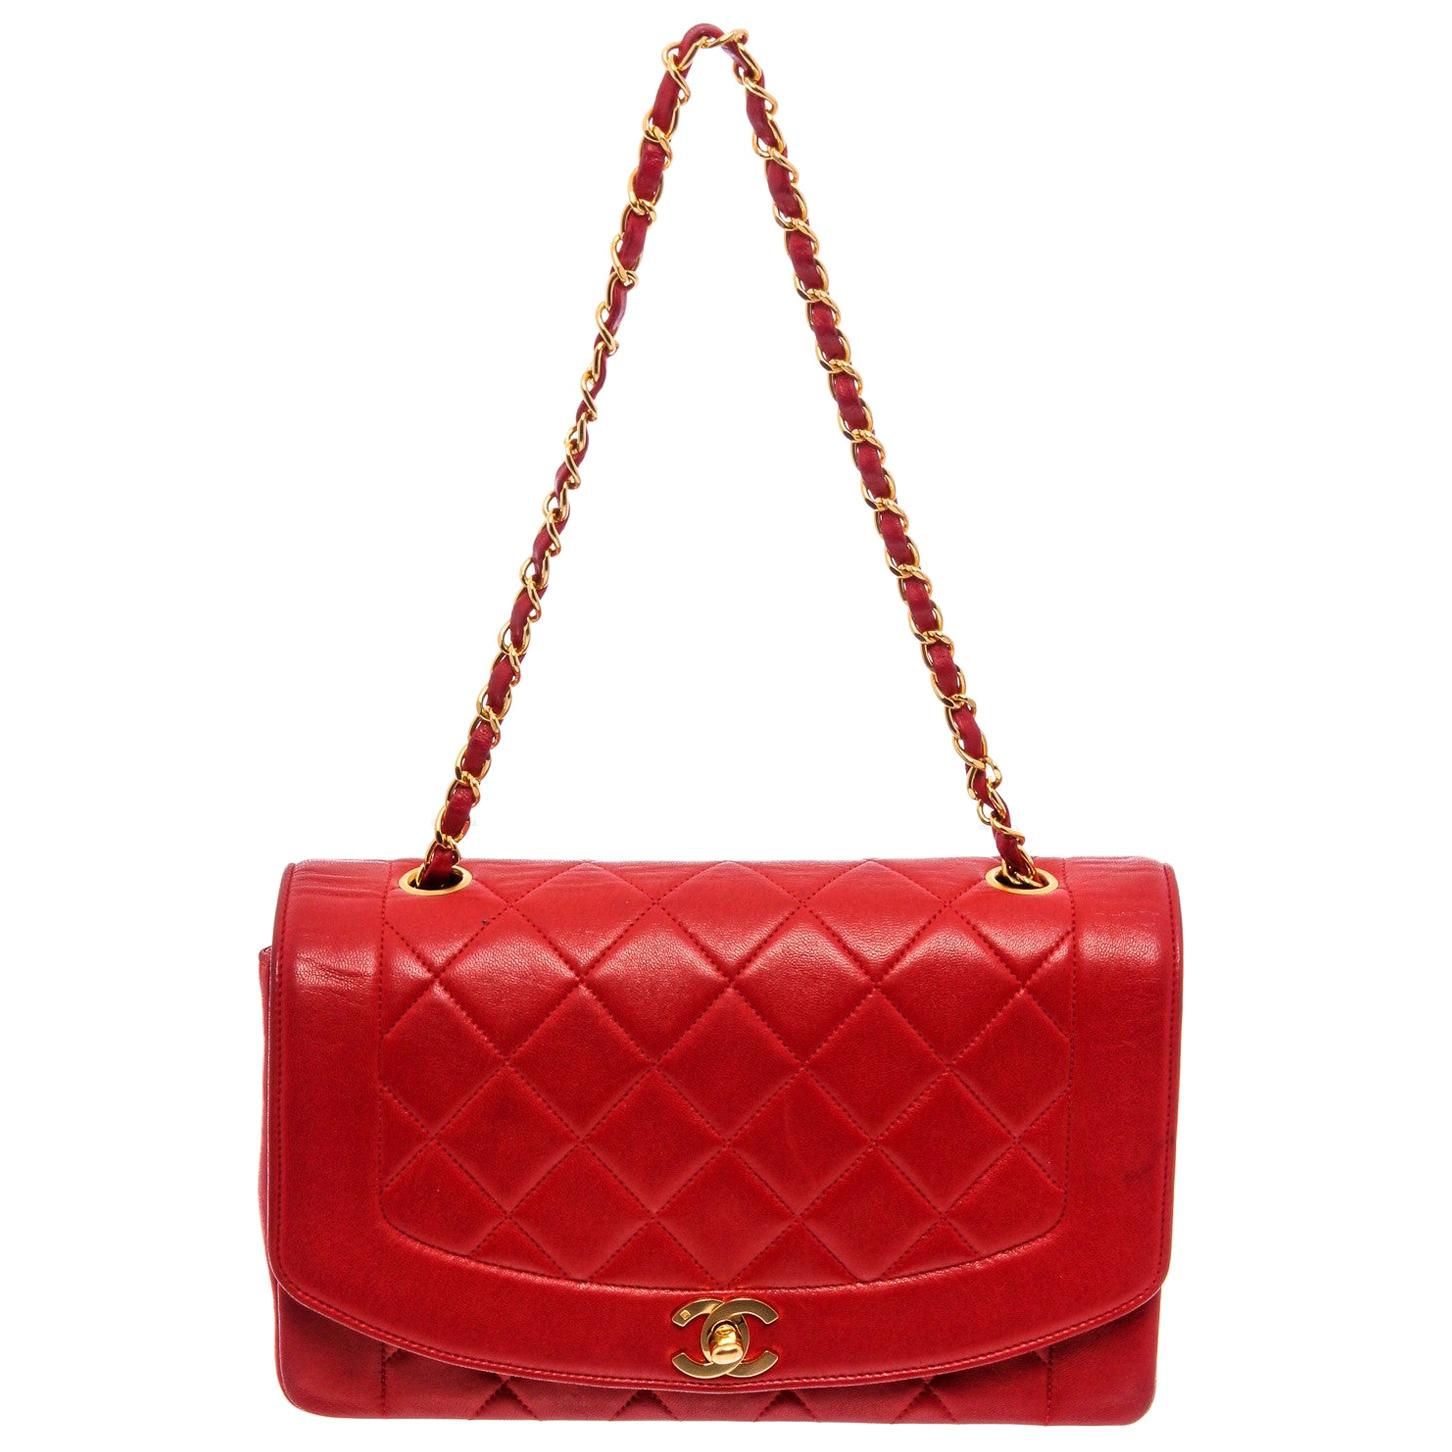 Chanel Red Quilted Lambskin Leather Diana Flap Shoulder Bag